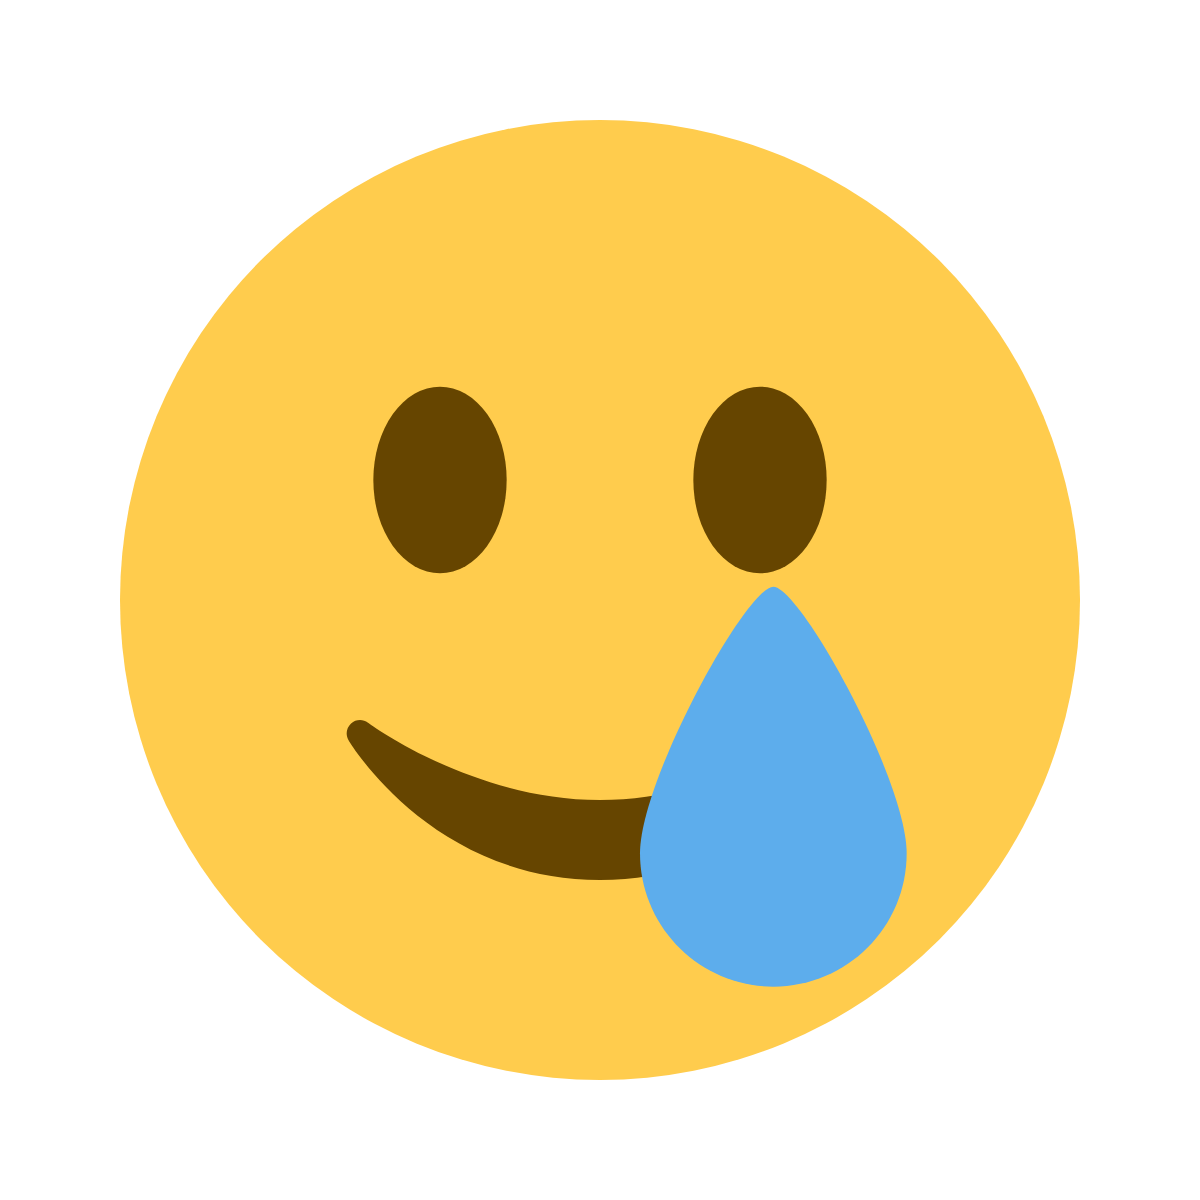 Smiling-Face-with-Tear-Emoji.png